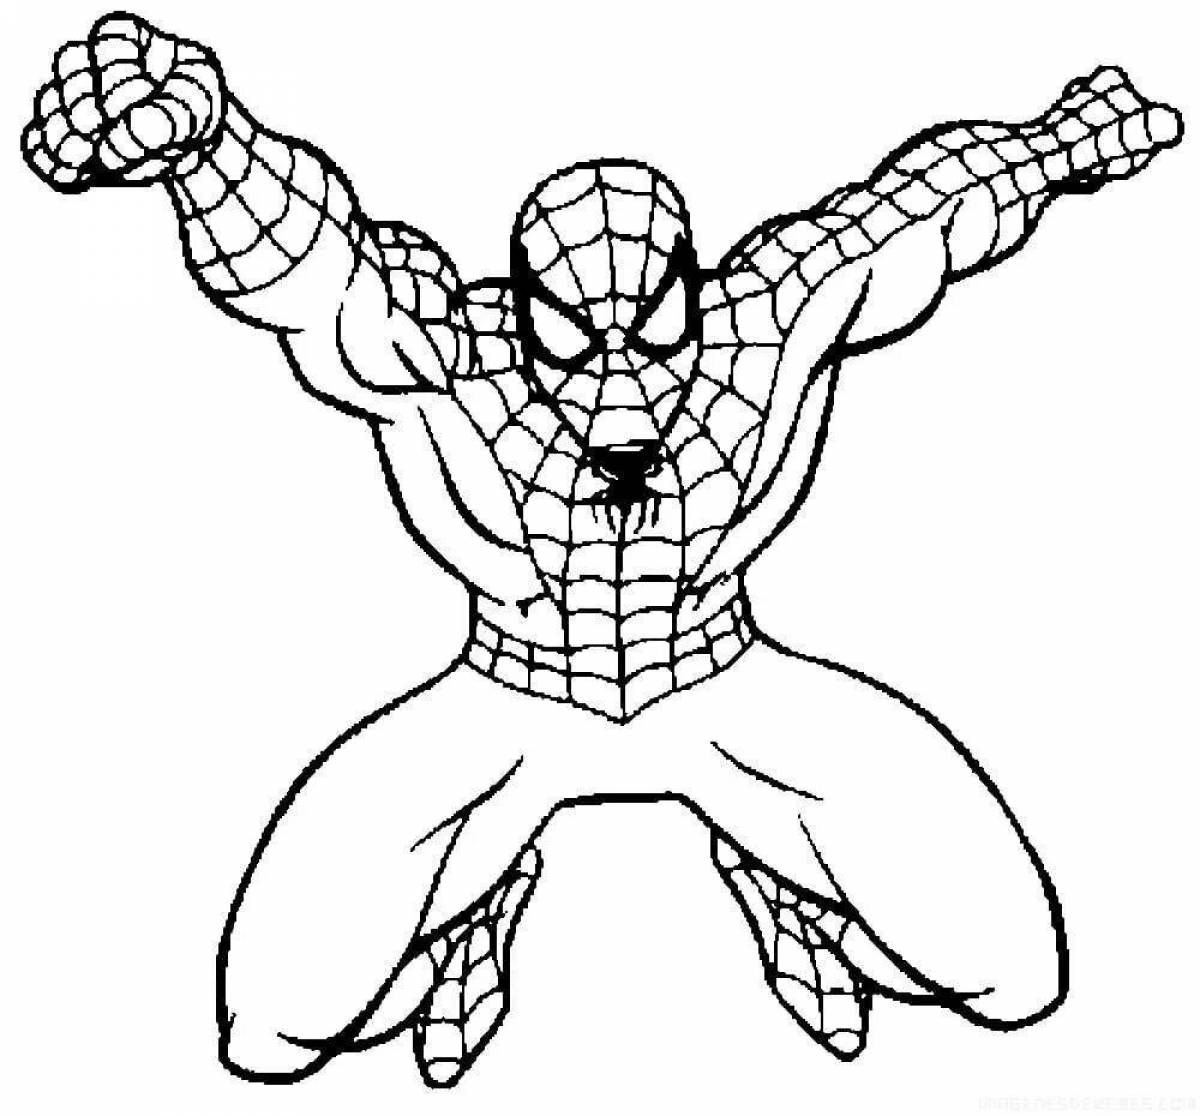 Charming spider-man antistress coloring book